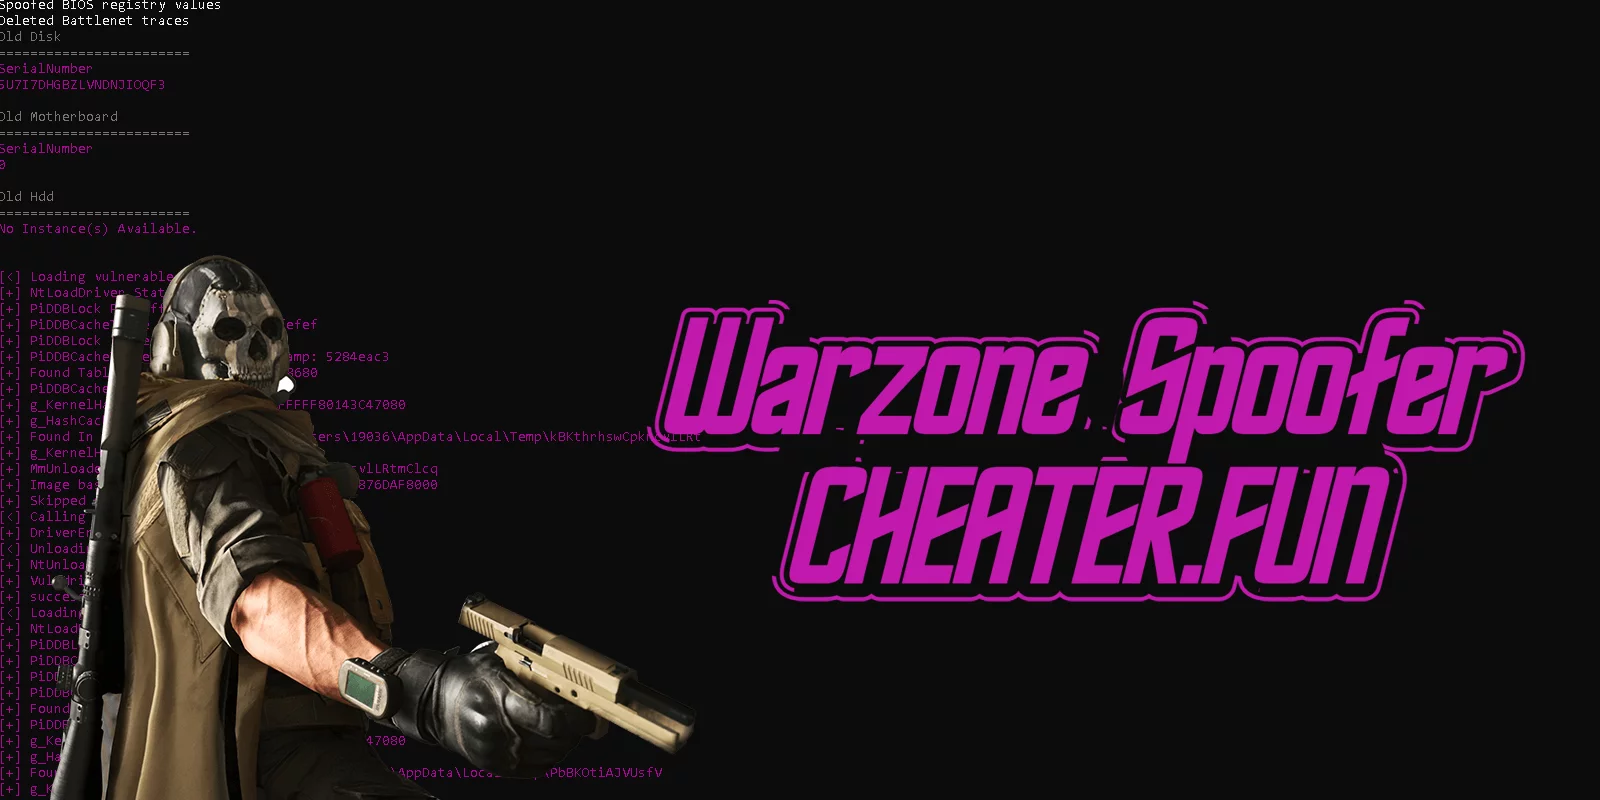 Download Warzone Free Spoofer